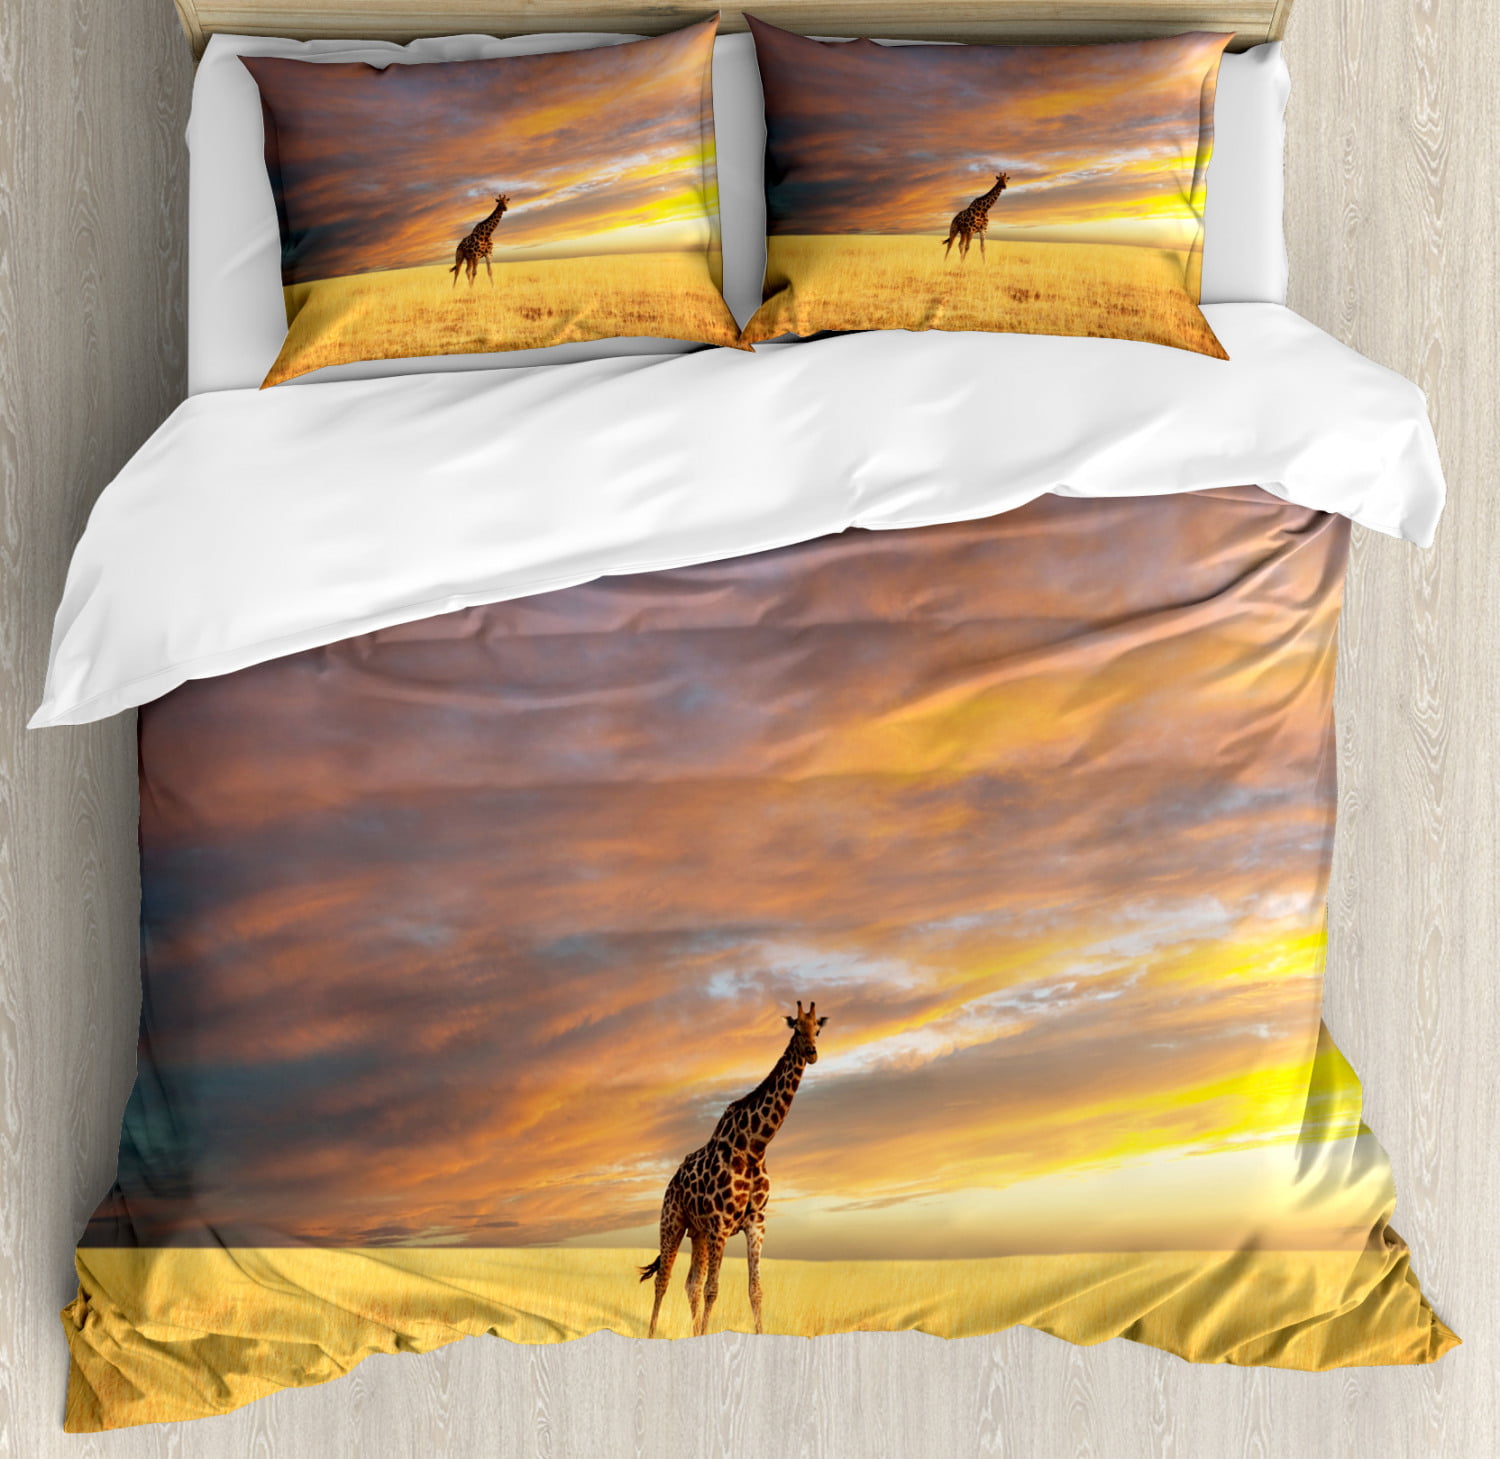 Giraffe Queen Size Duvet Cover Set, Animal in Savannah under Clouds at  Sunset African Wildlife Themed Safari, Decorative 3 Piece Bedding Set with  2 Pillow Shams, Yellow Blue Mauve, by Ambesonne - Walmart.com